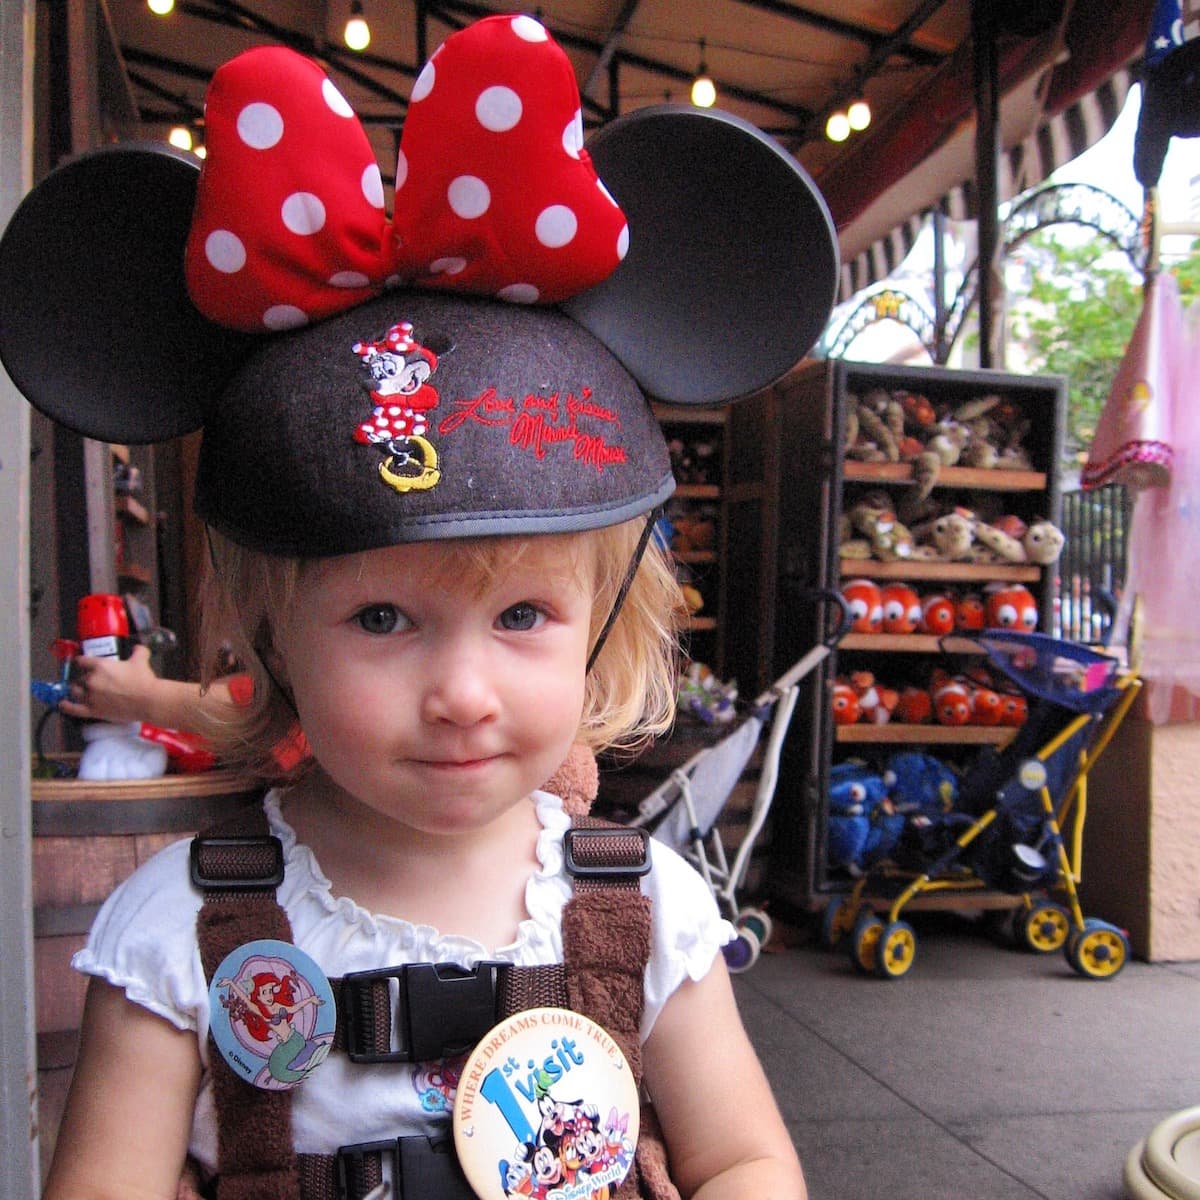 2 year old girl at Disney World sporting Minnie ears and 1st visit button